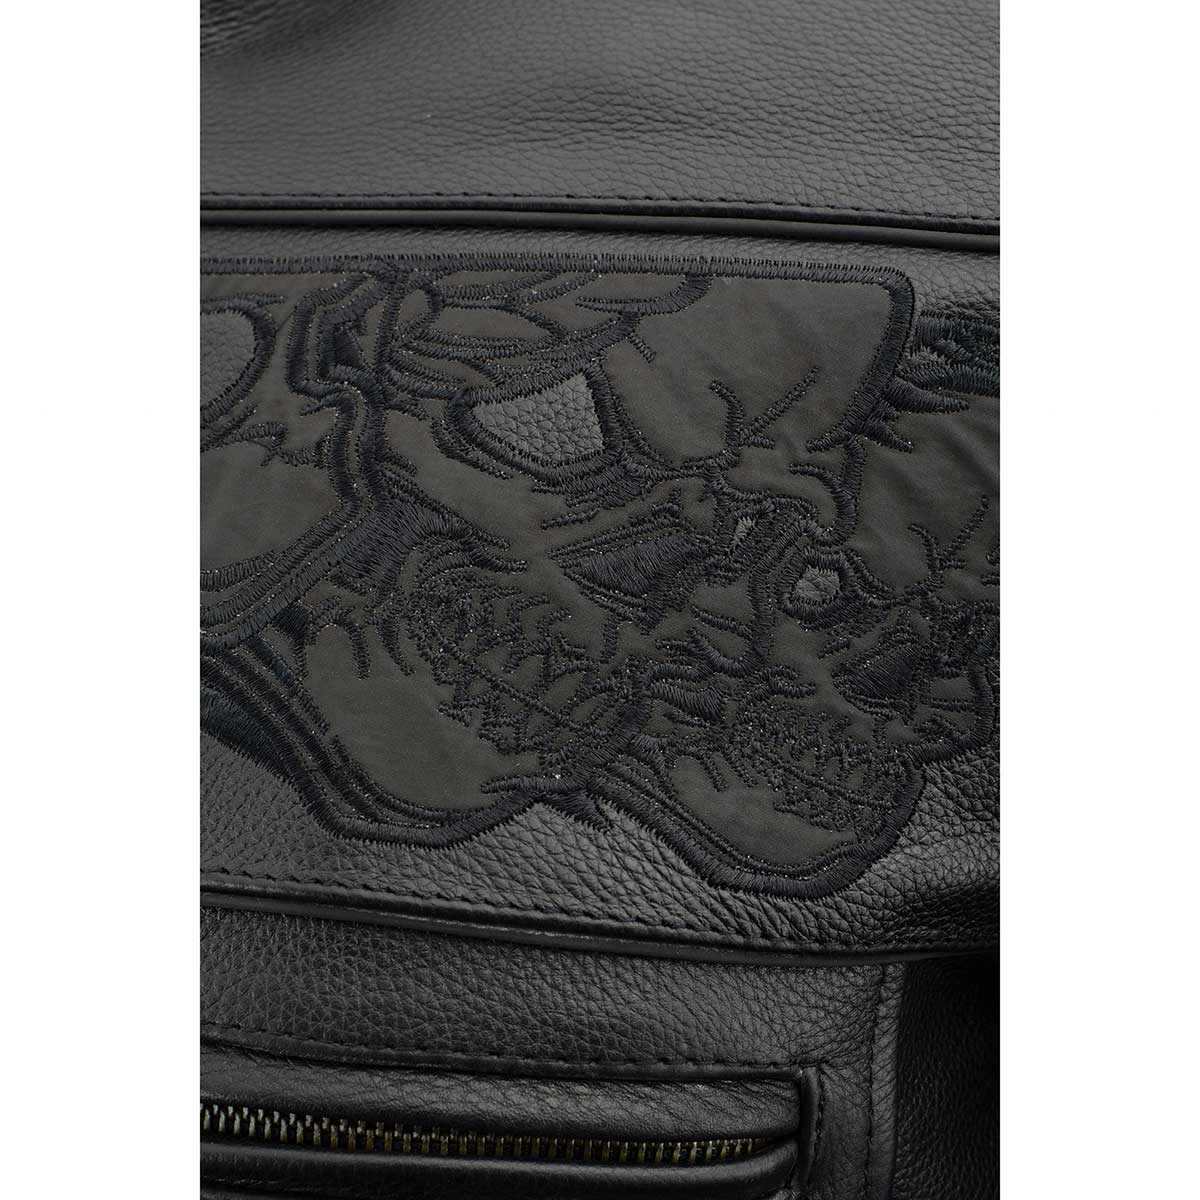 Milwaukee Leather MLM1500 Men's Crossover Black Leather Scooter Jacket with Reflective Skulls